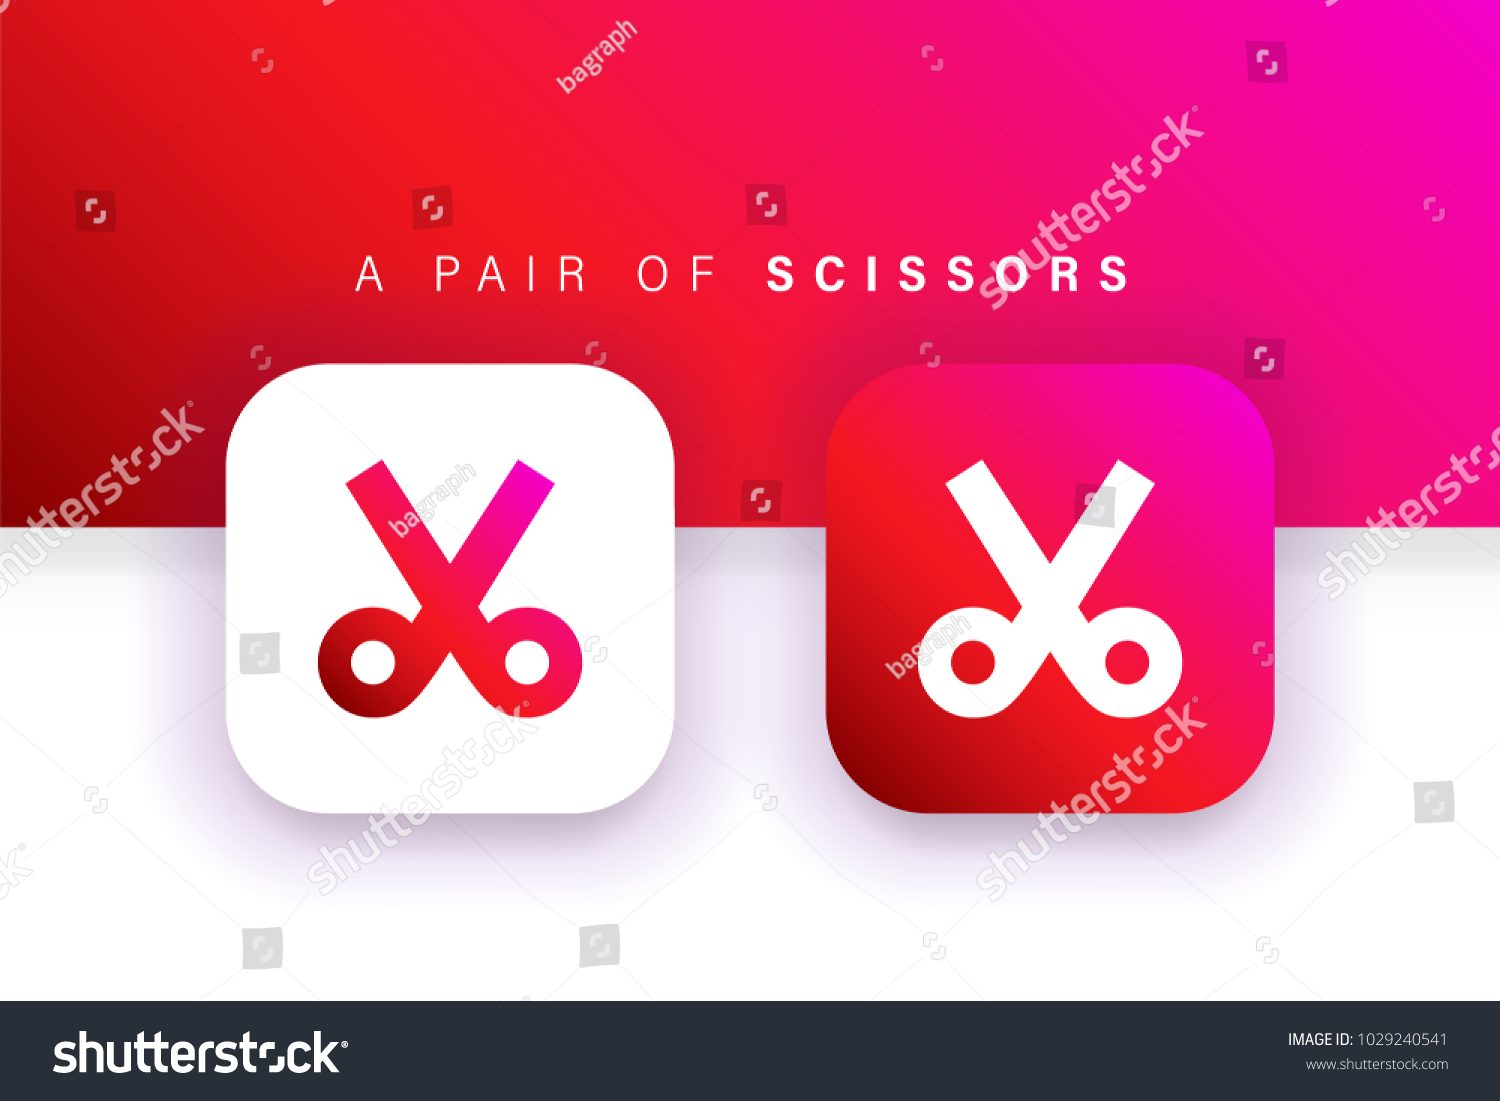 SVG of Scissors Icon. Cut, trim icon. Square contained. Use for brand logo, application, ux-ui, web. Red design. Compatible with jpg, png, eps, cdr, svg, pdf, ico, gif. svg